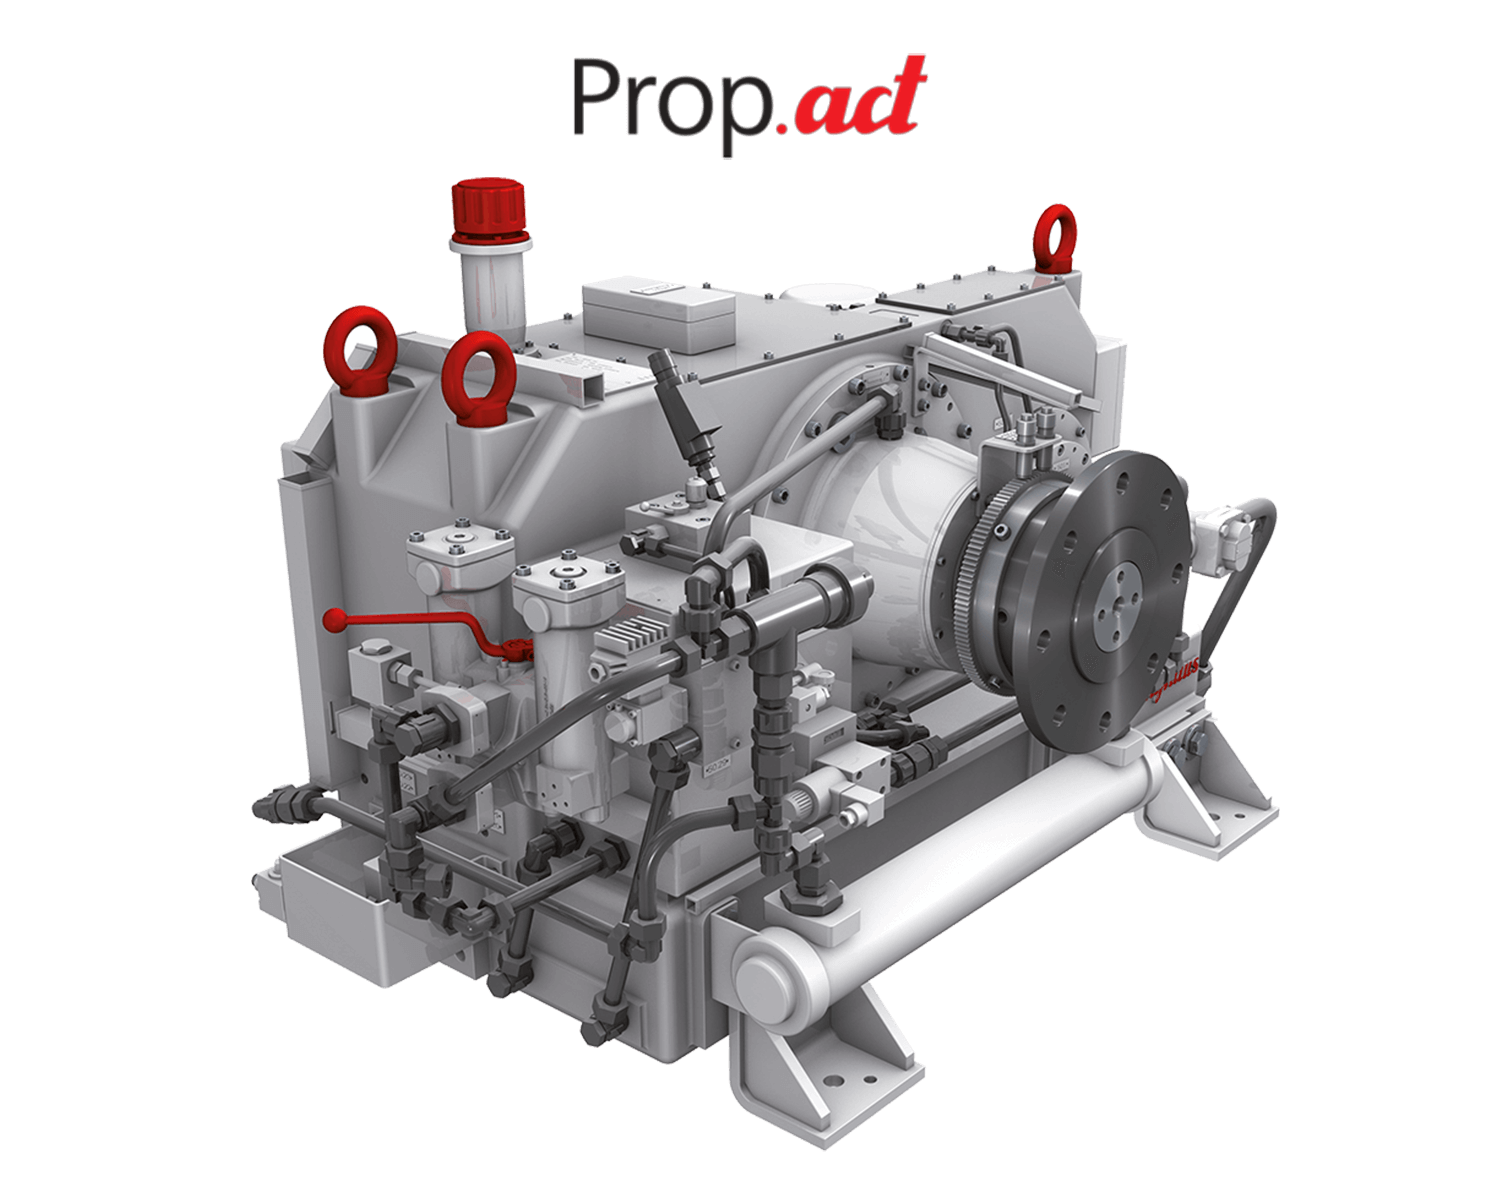 ortlinghaus_mechatronic_system_propact